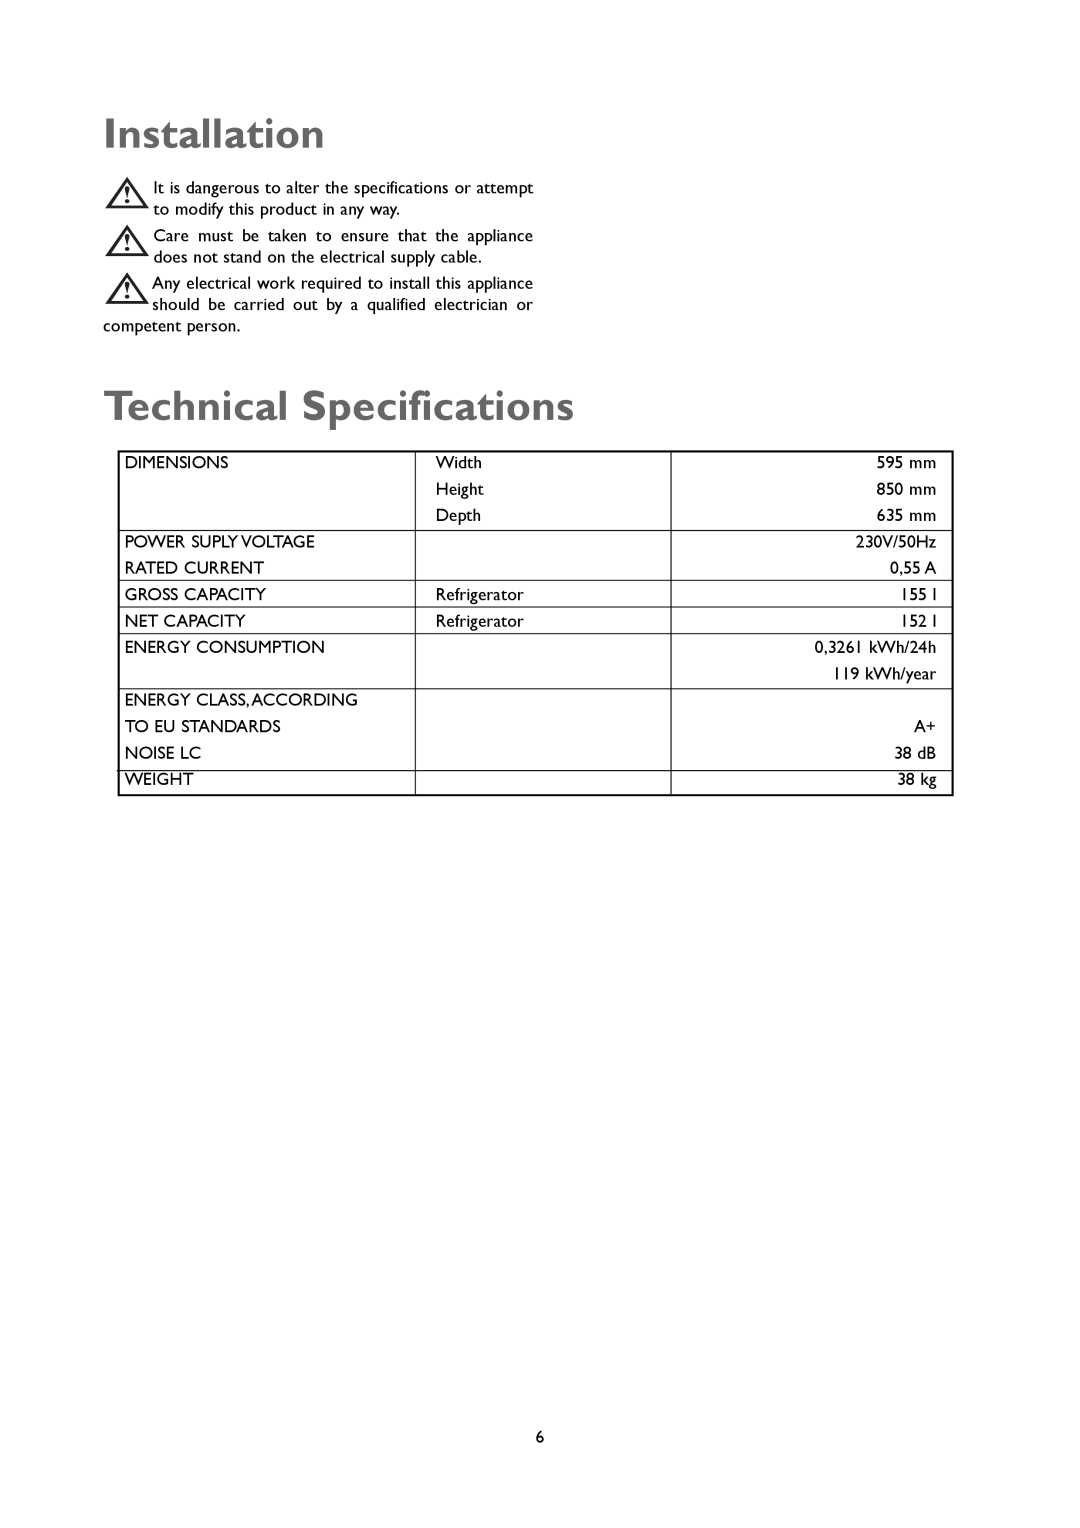 John Lewis JLUCLFW6003 instruction manual Installation, Technical Specifications 